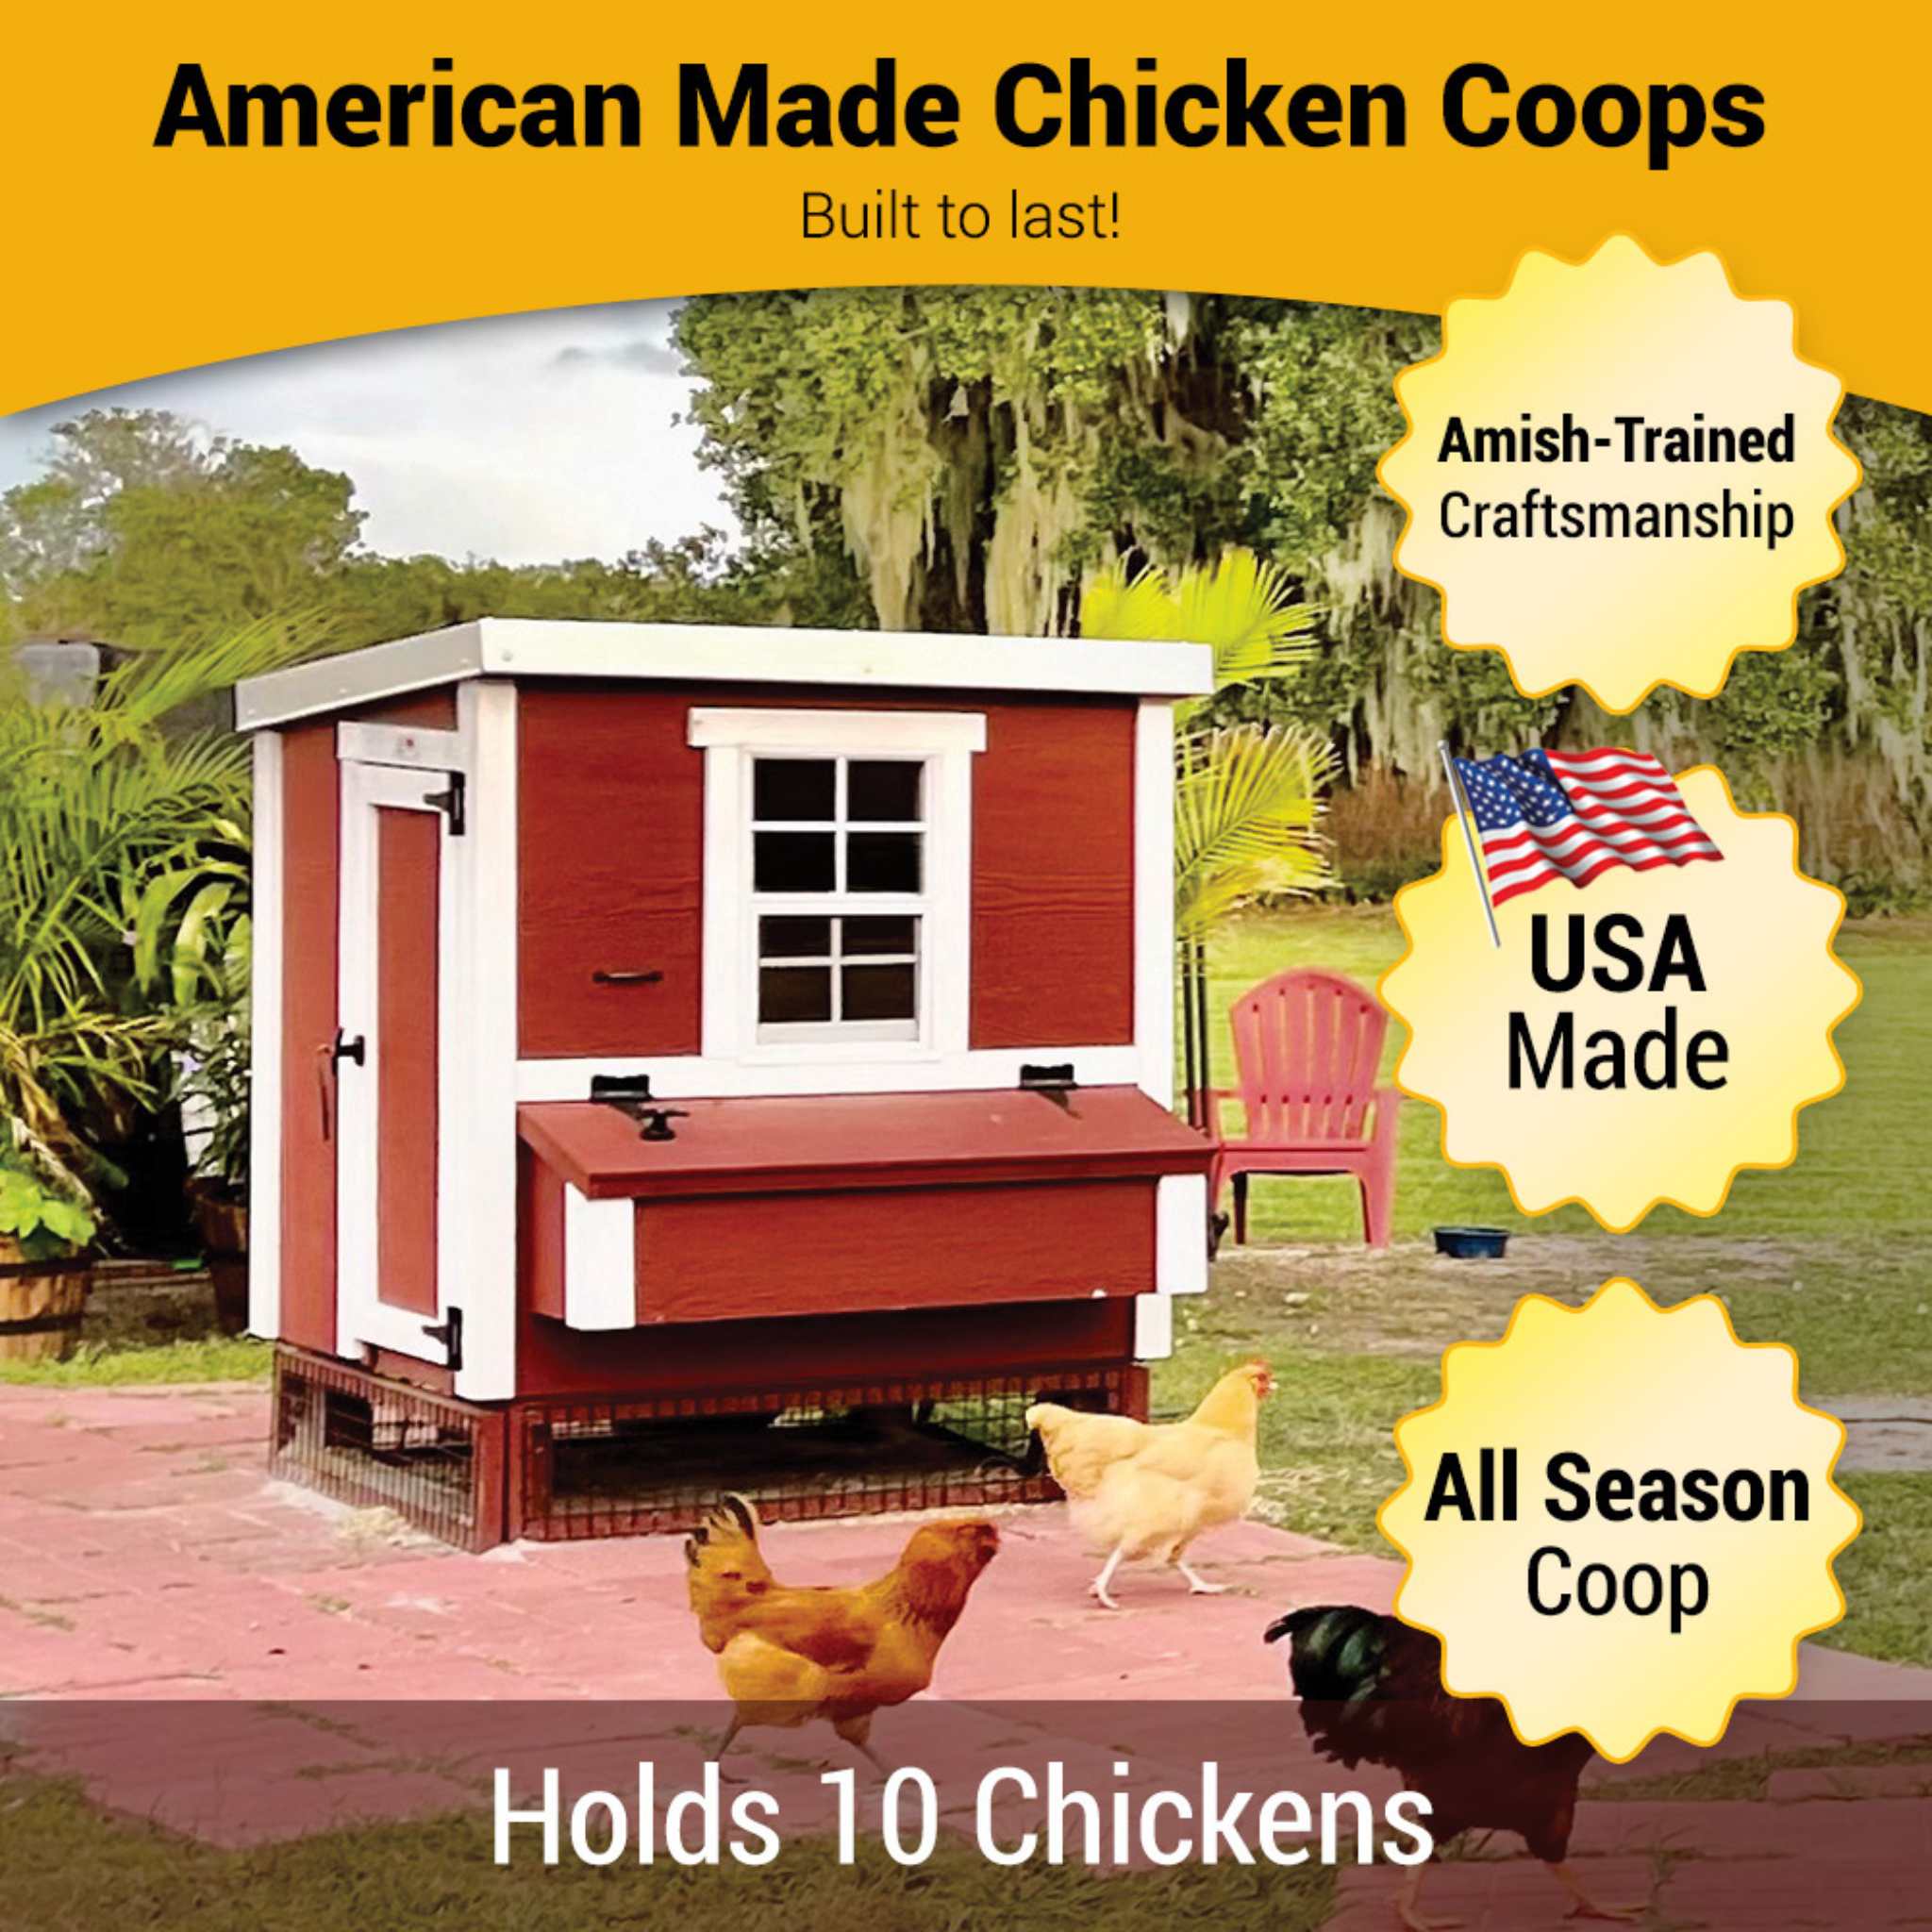 Hatching Time OverEZ. Infographic shows medium chicken coop can hold 10 chickens, is made in the USA with Amish-trained craftsmanship and is good for all seasons. 